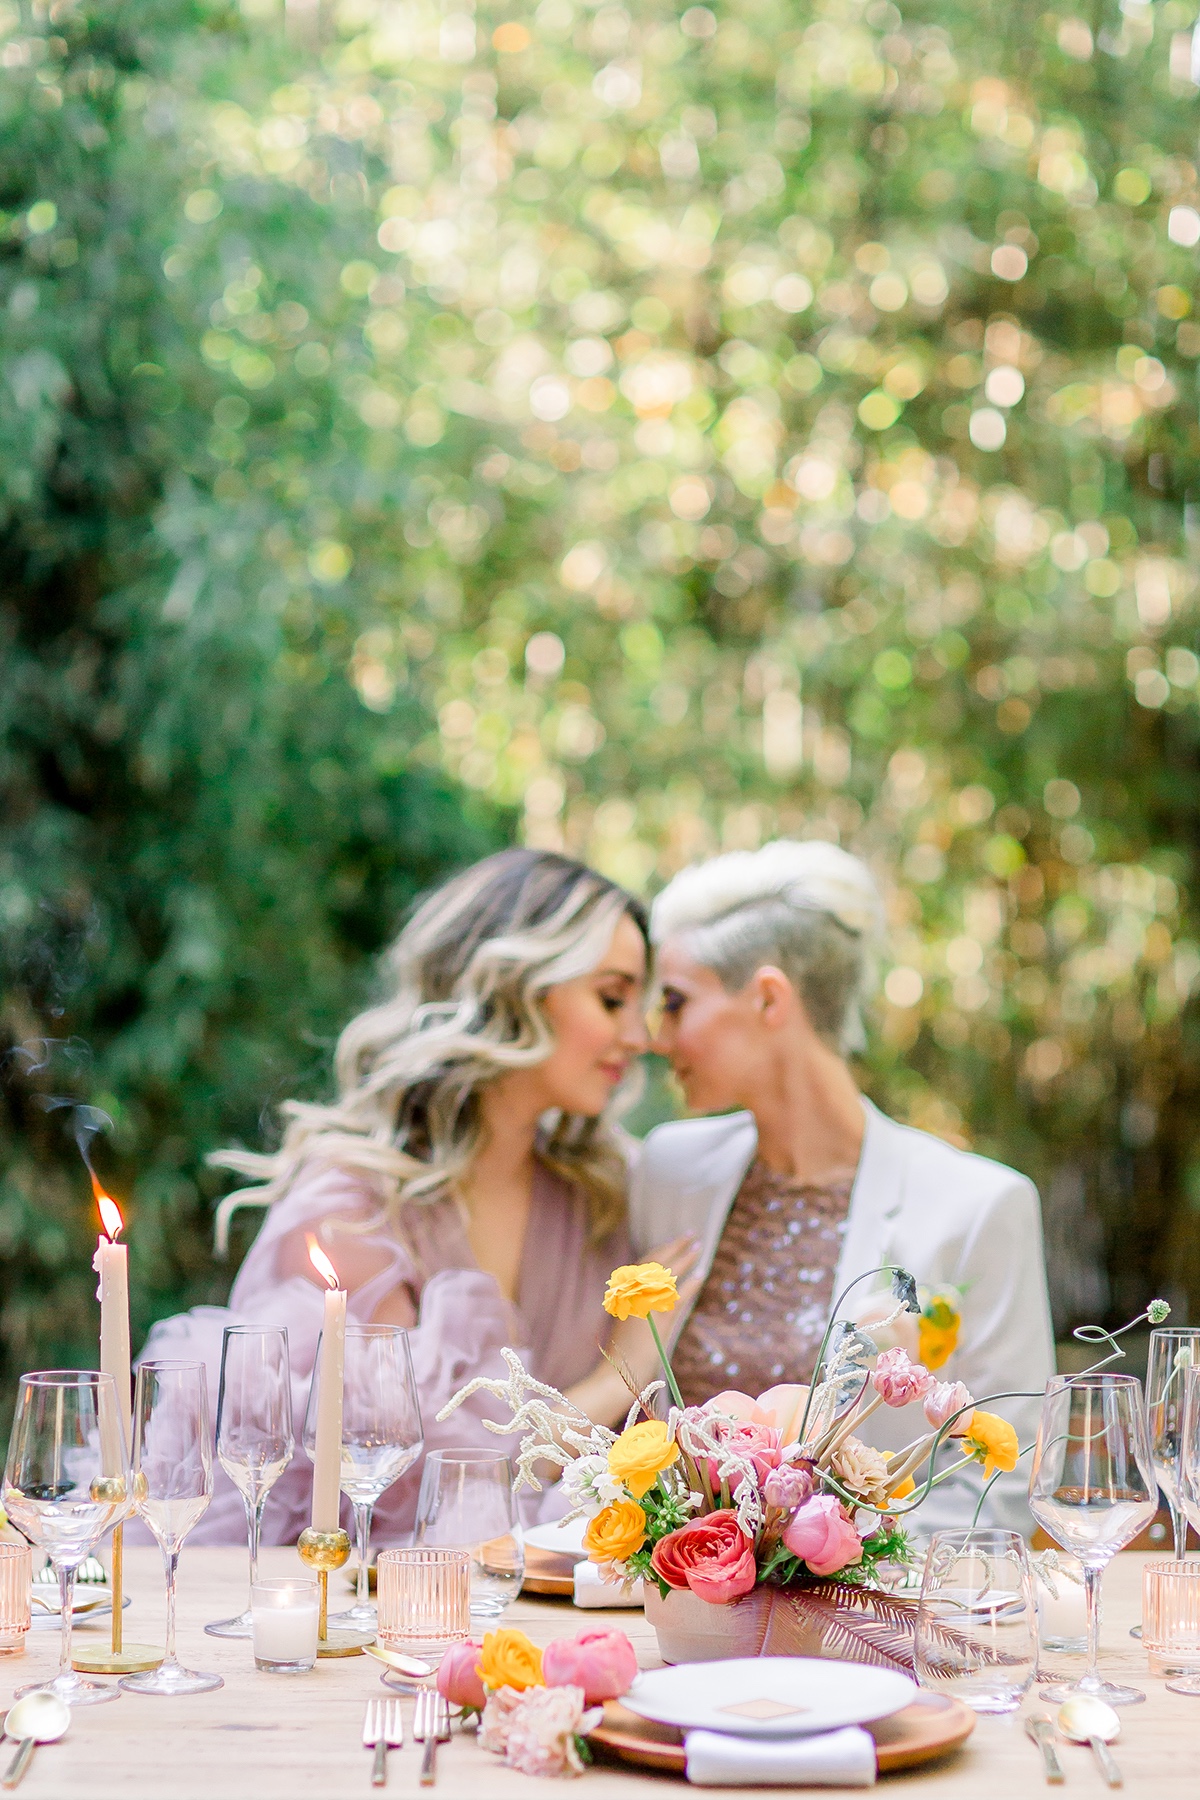 The Epitome of Elopement Style